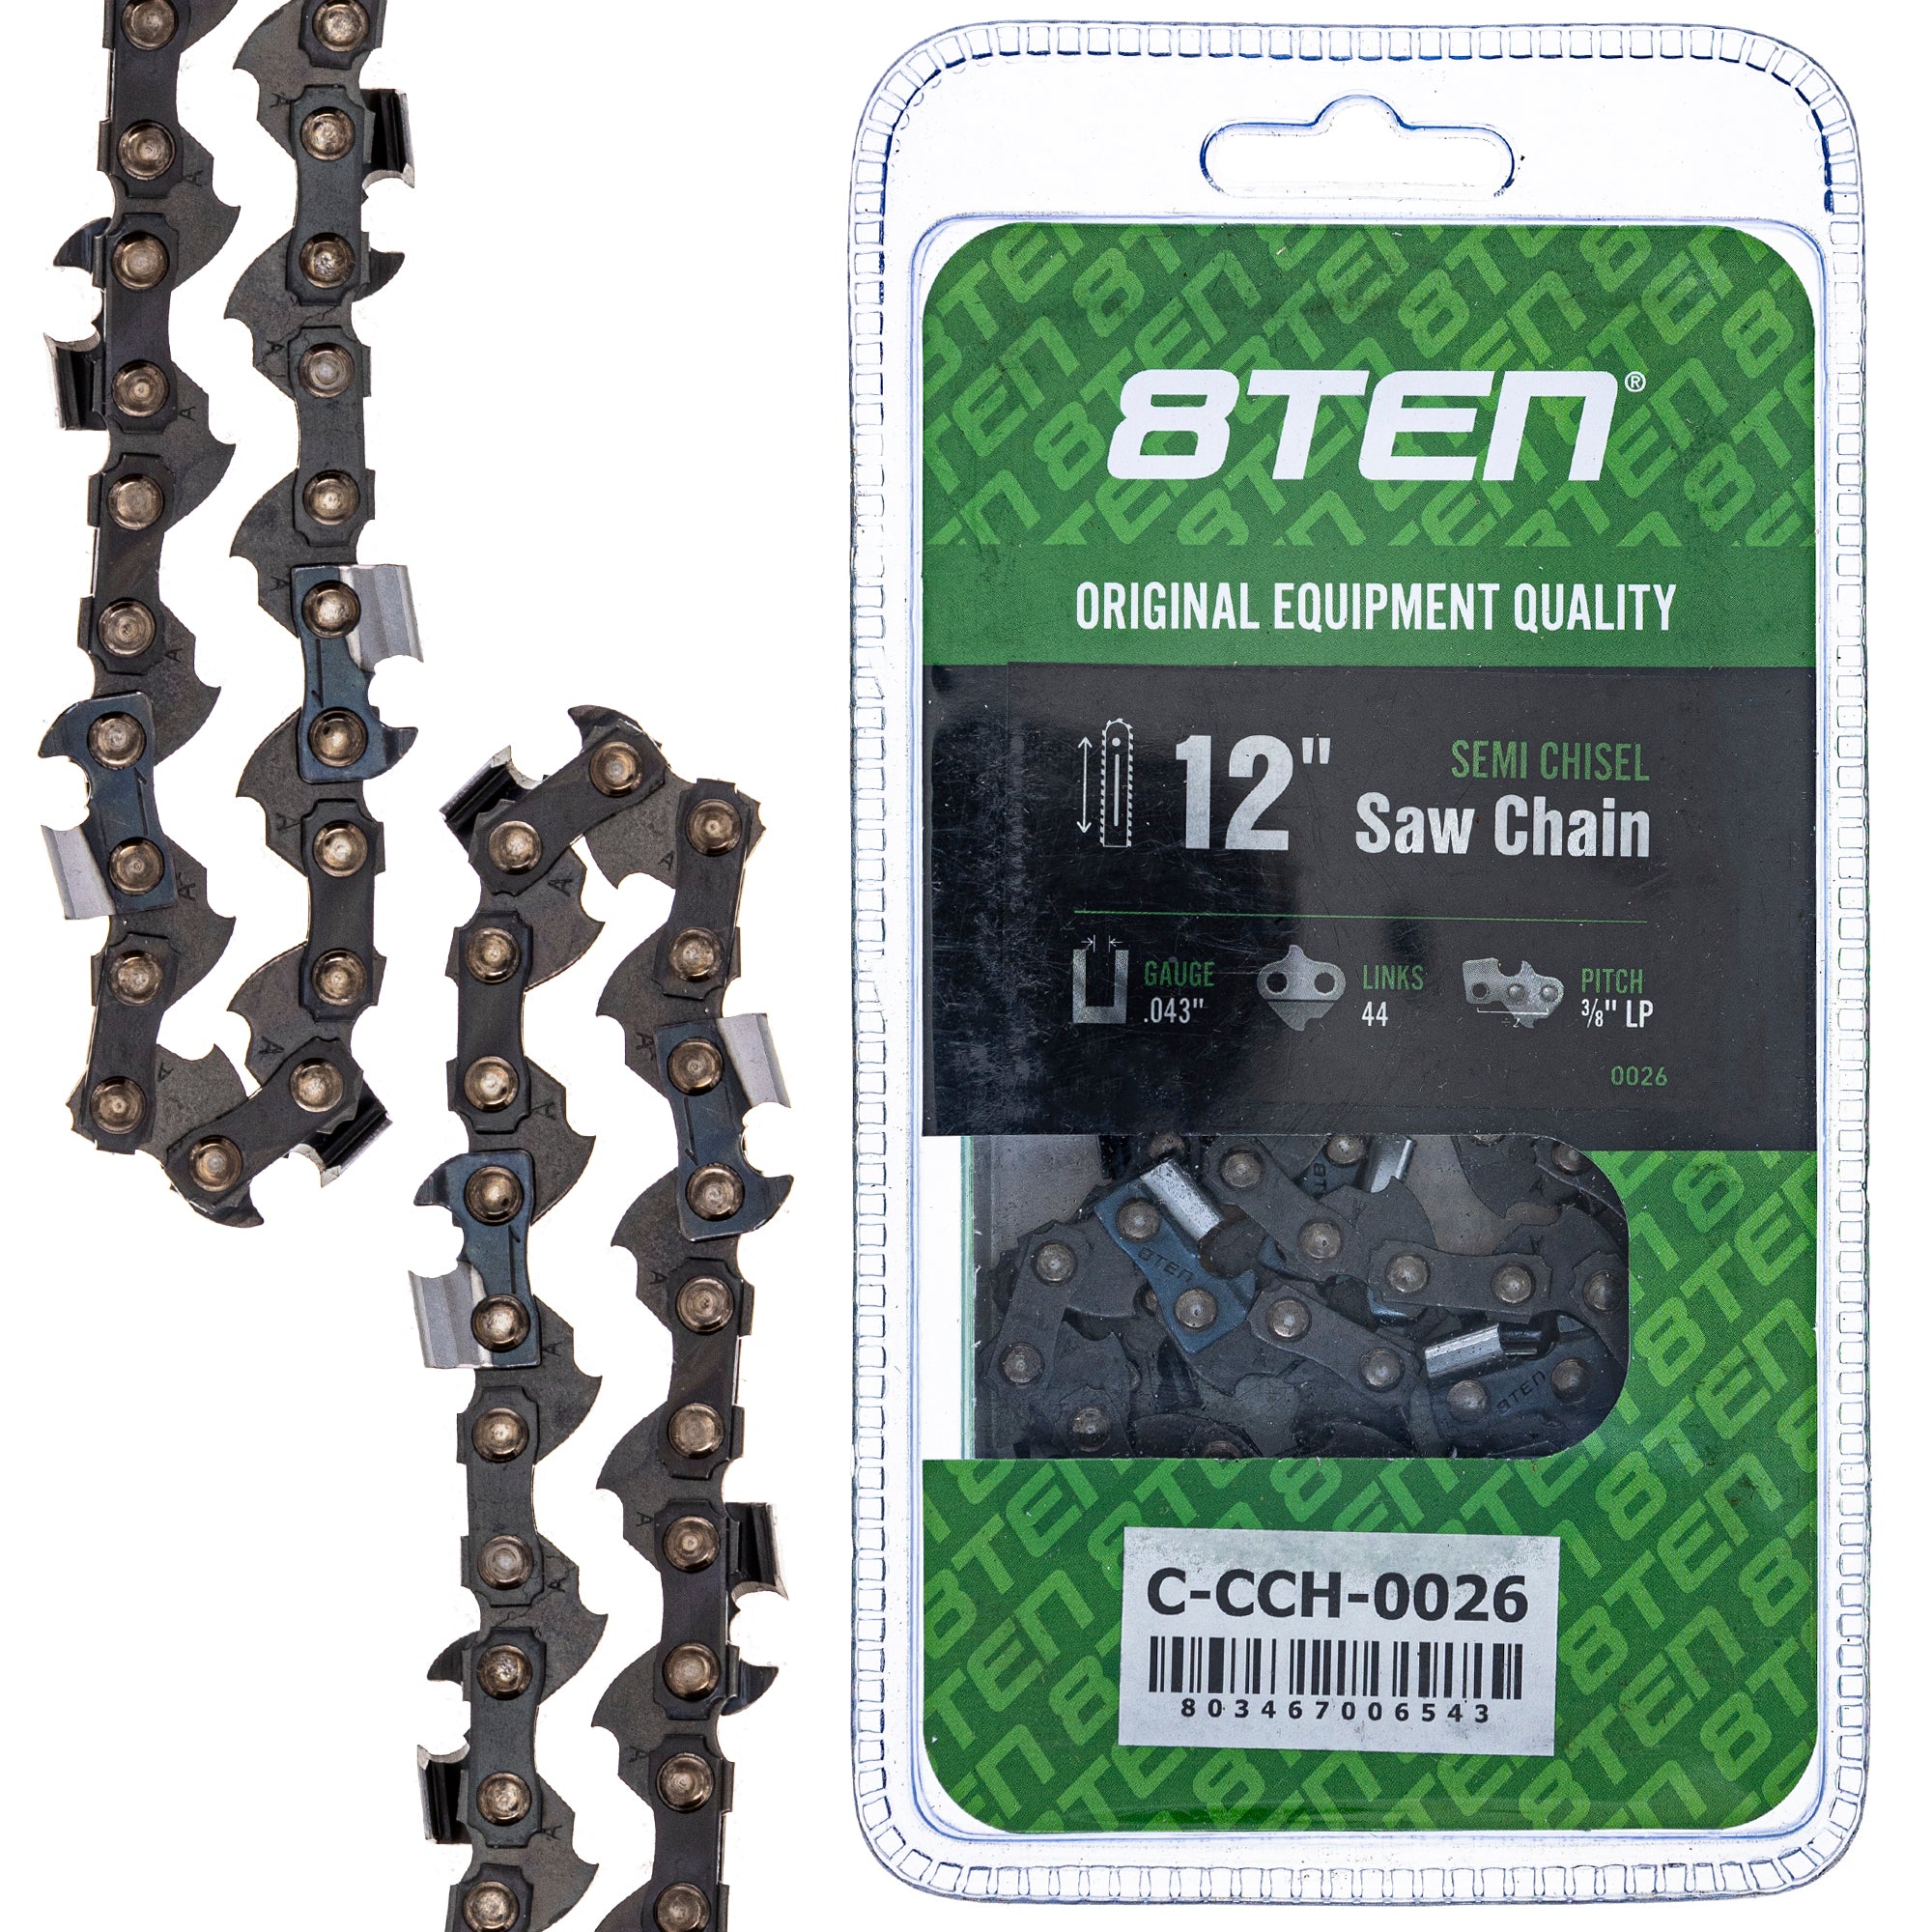 Chainsaw Chain .043 3/8 44DL for zOTHER Stens Oregon Ref. Oregon Carlton PPT-266H PPT-266 8TEN 810-CCC2248H